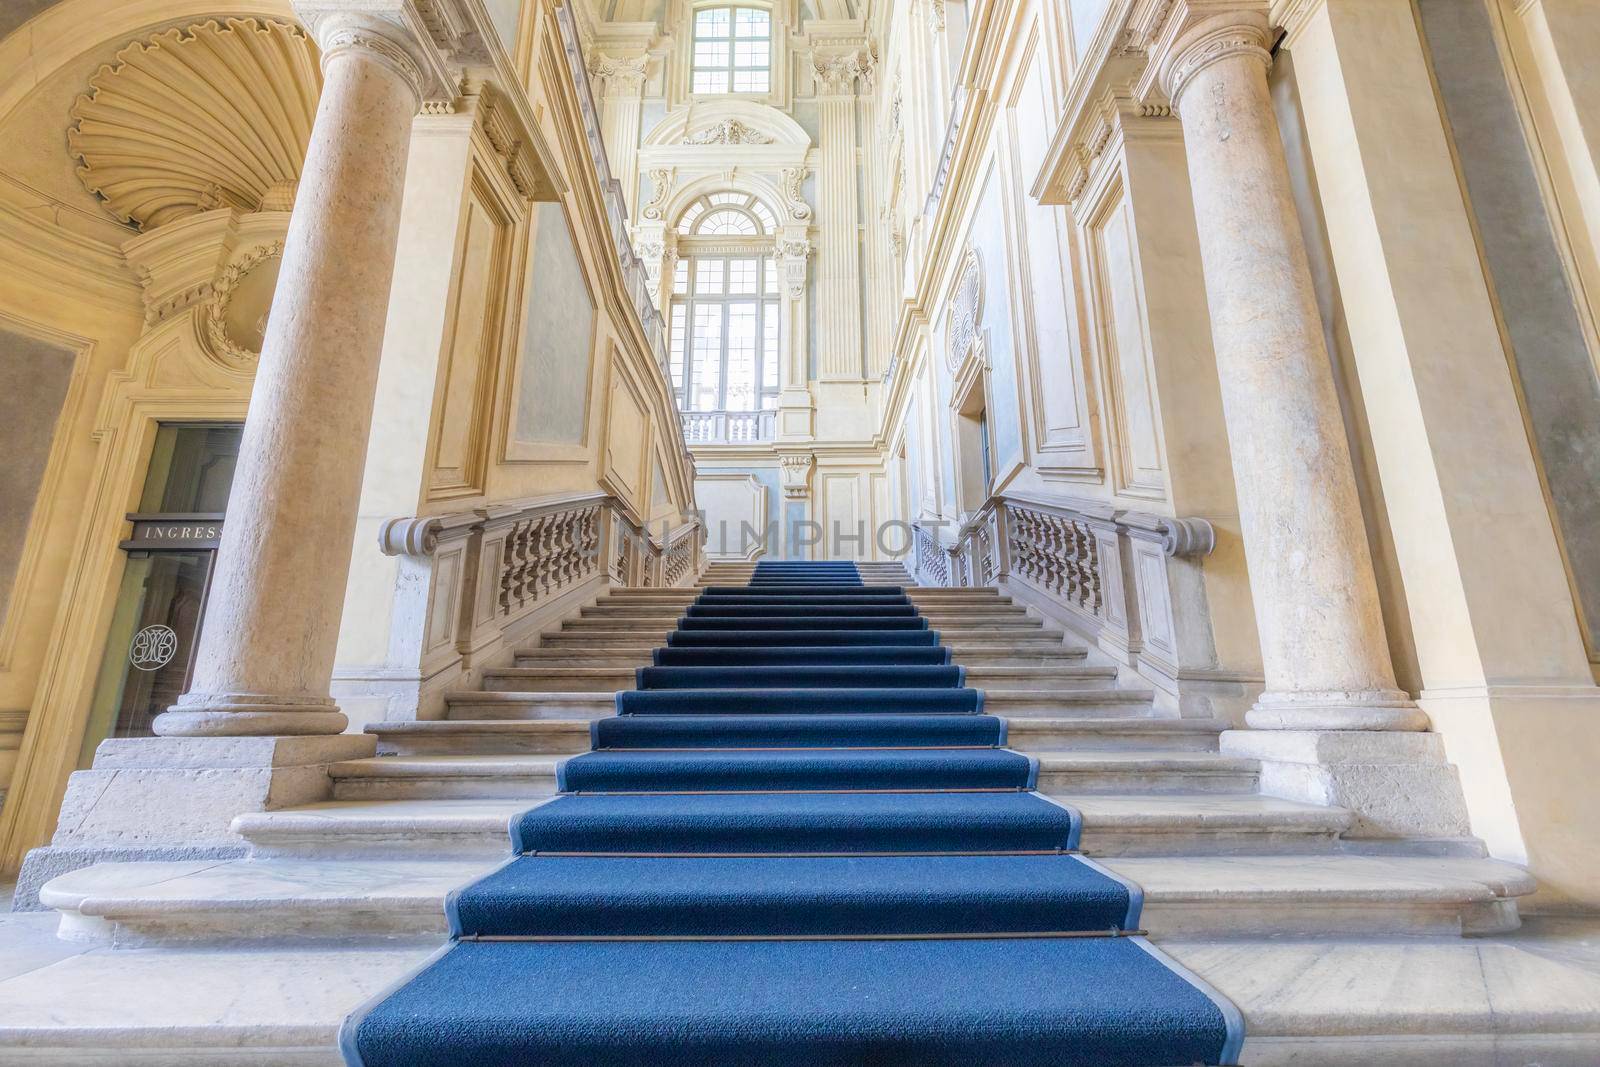 TURIN, ITALY - CIRCA JUNE 2021: The most beautiful Baroque staircase of Europe located in Madama Palace (Palazzo Madama). Interior with luxury marbles, windows and corridors.